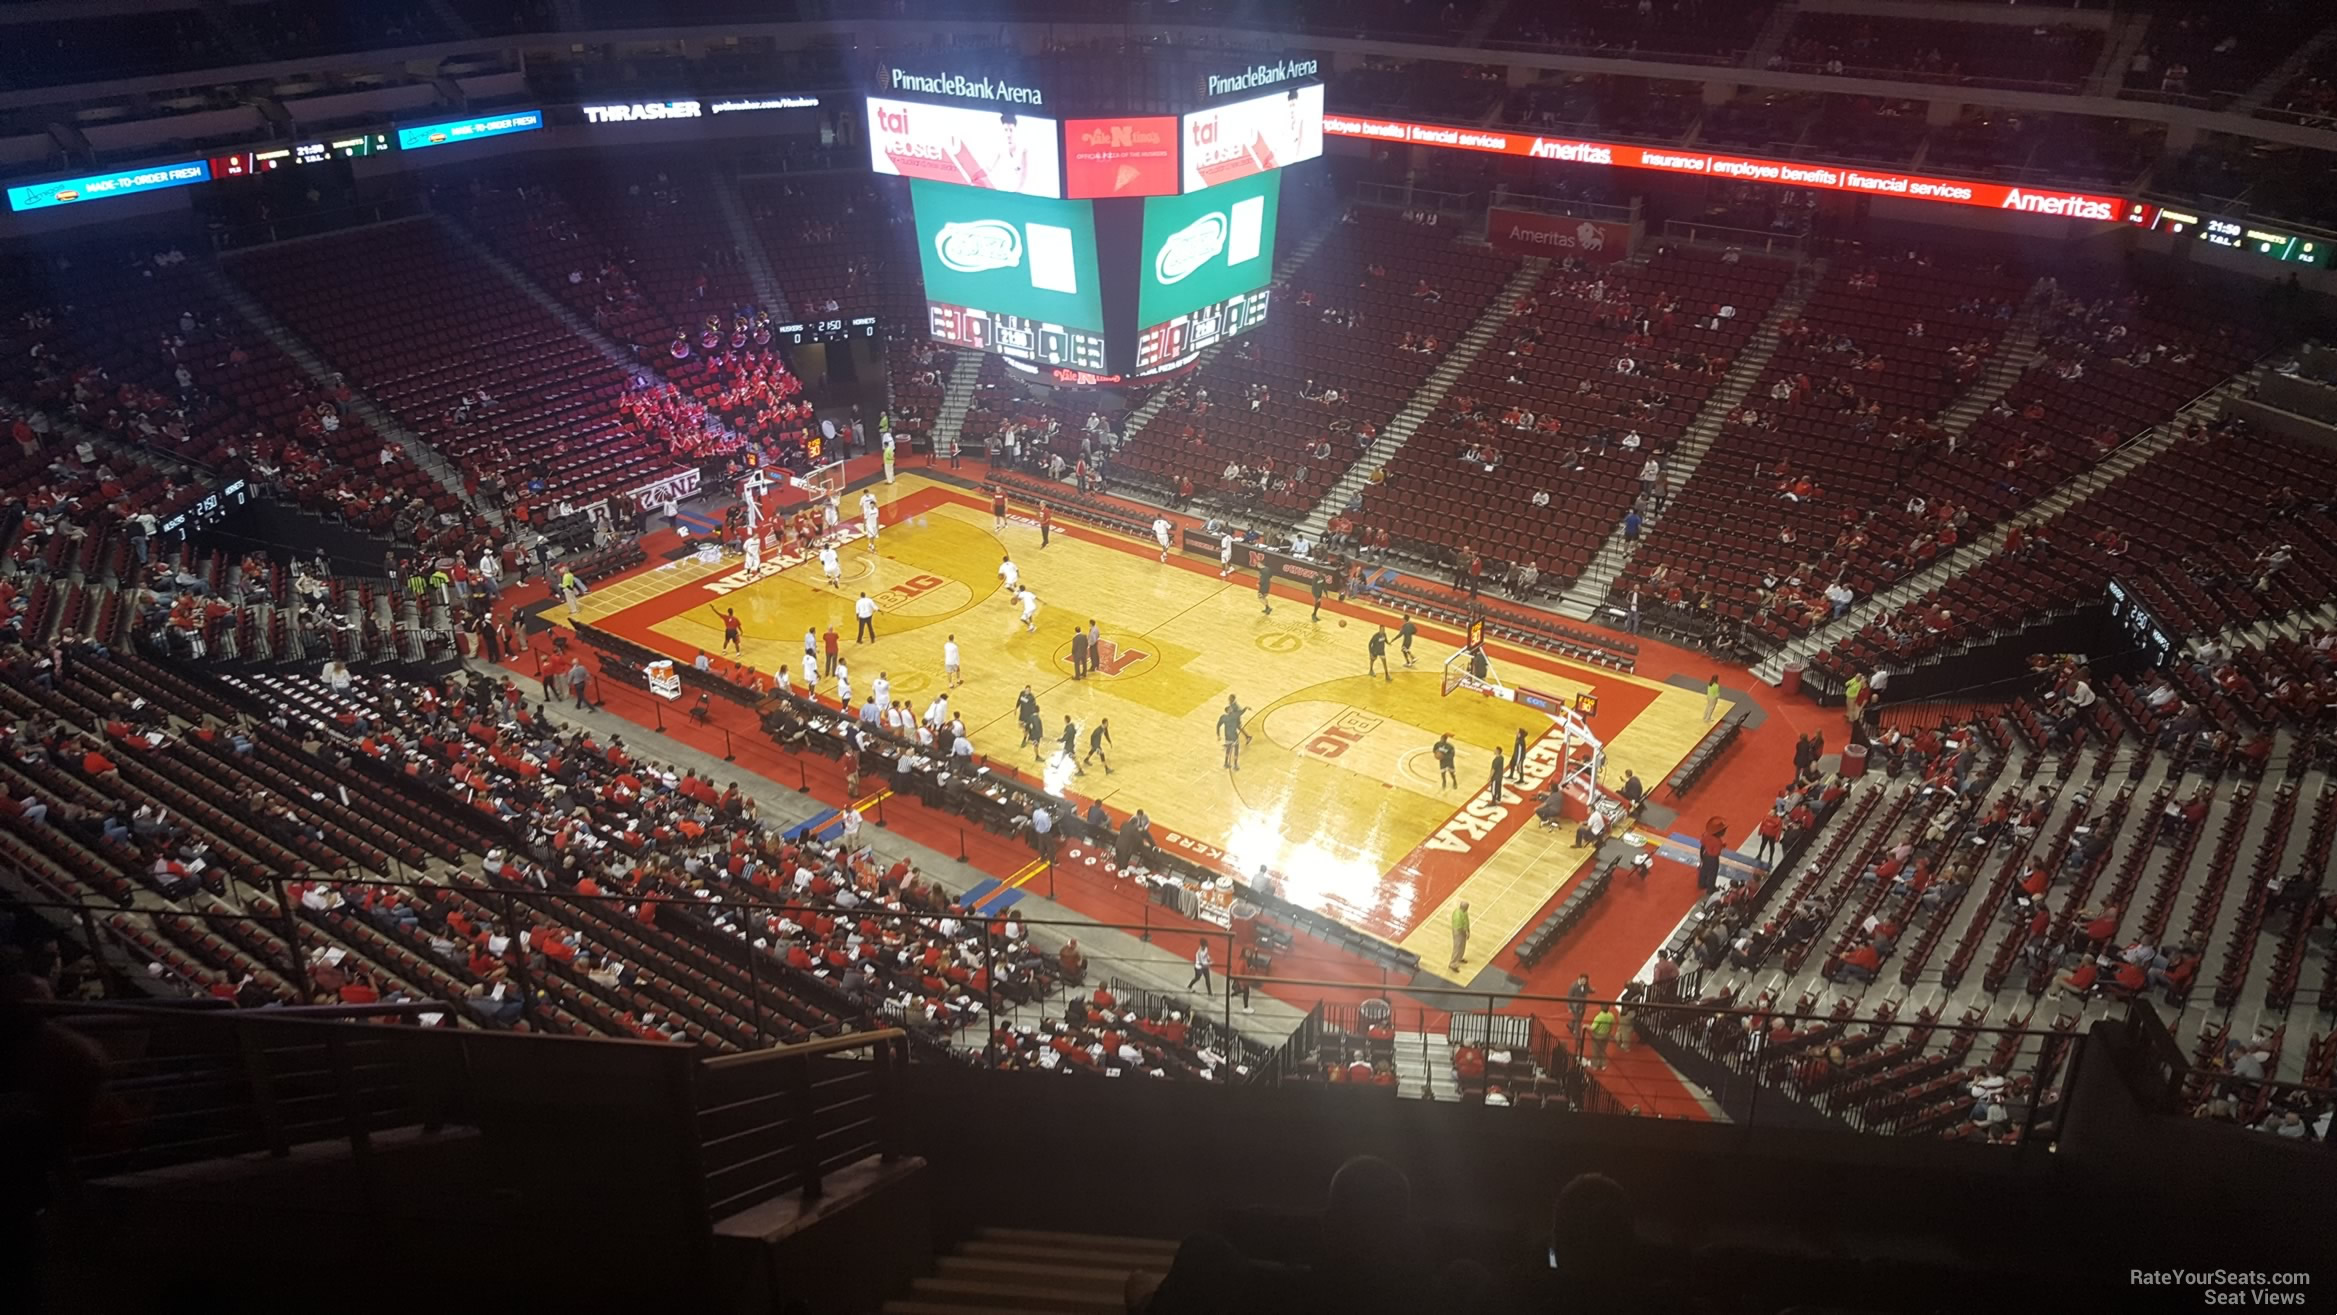 section 301, row 6 seat view  for basketball - pinnacle bank arena